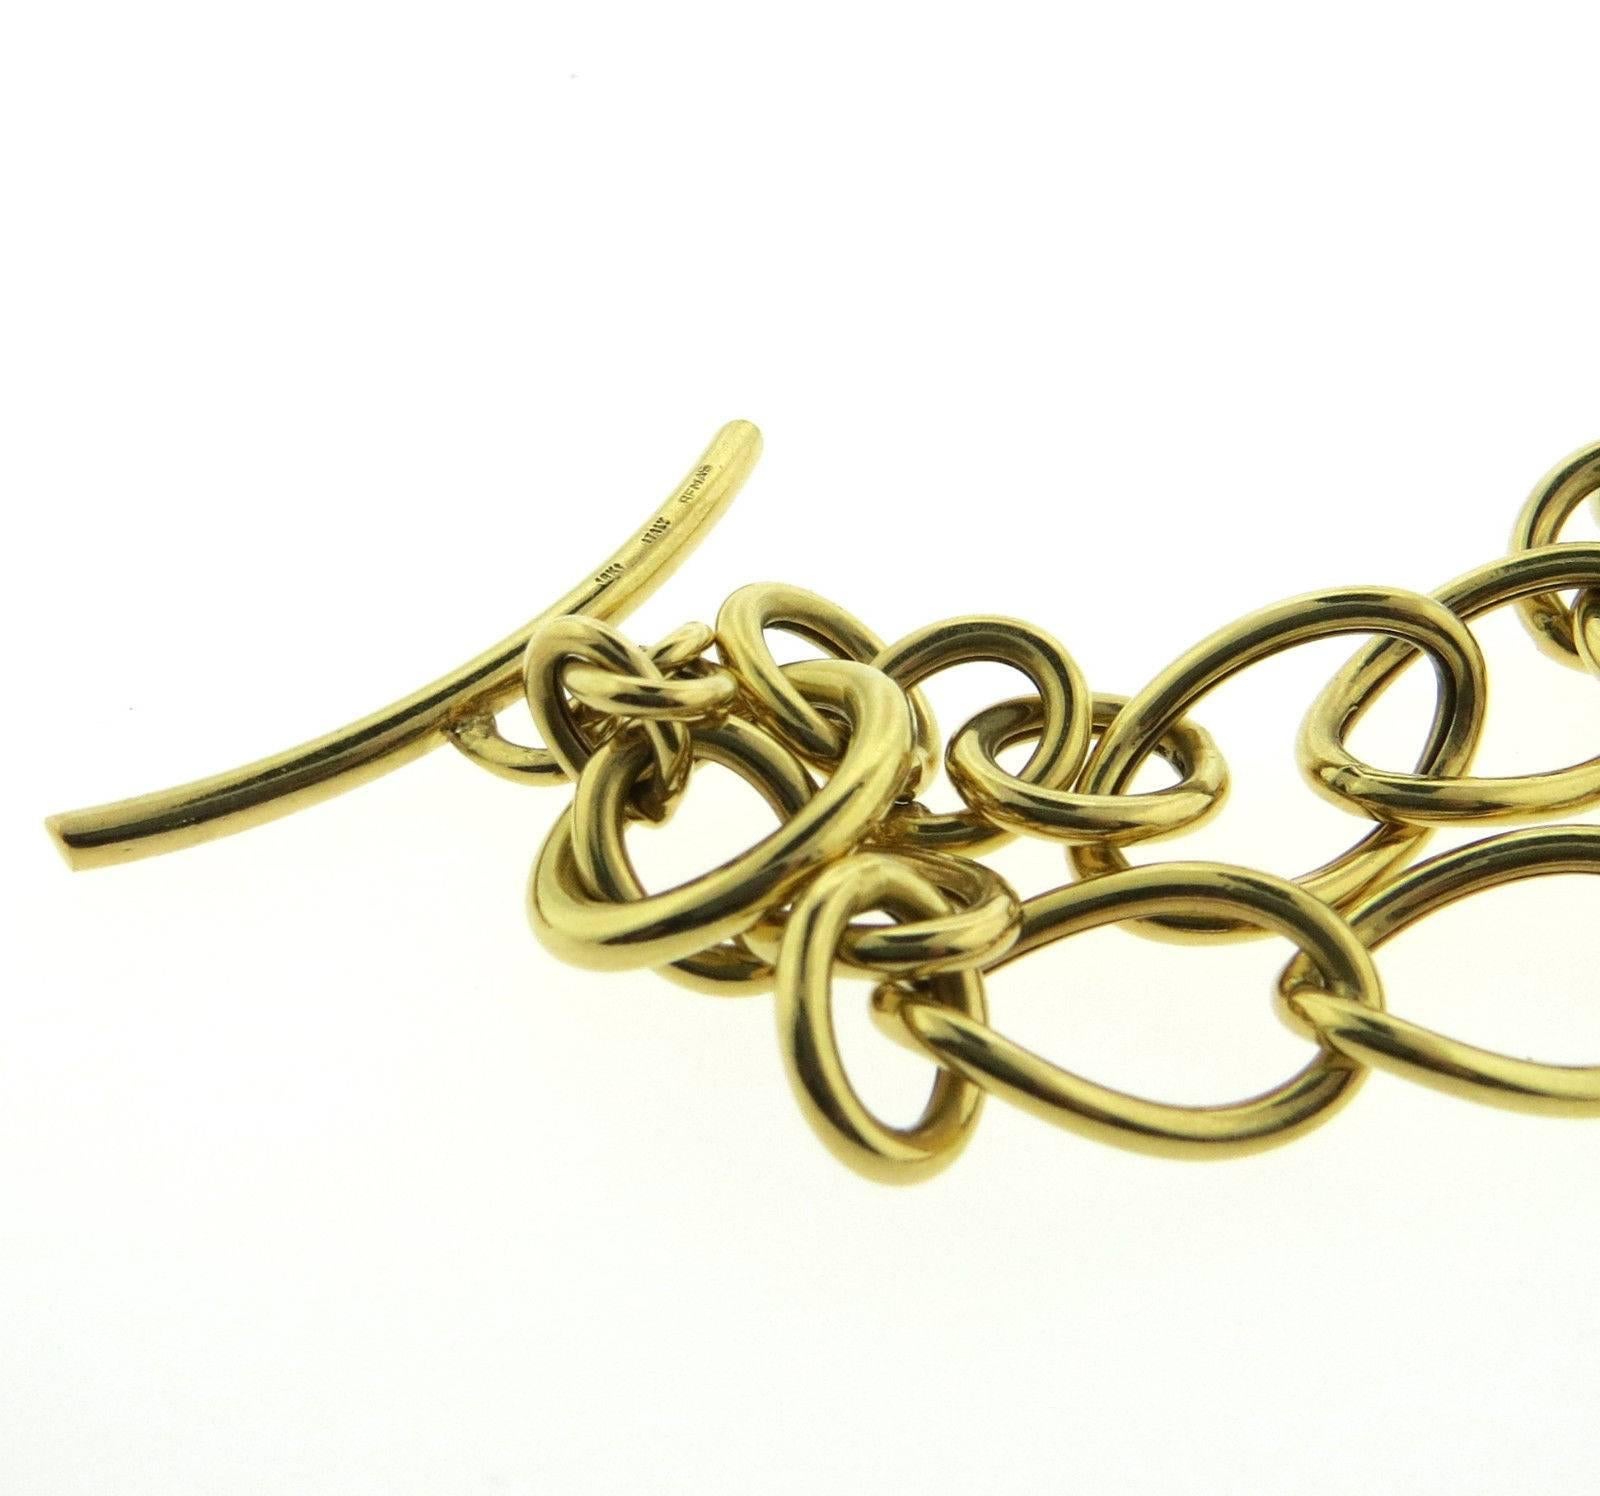 An 18k yellow gold necklace by Faraone Mennella.  The necklace is 16